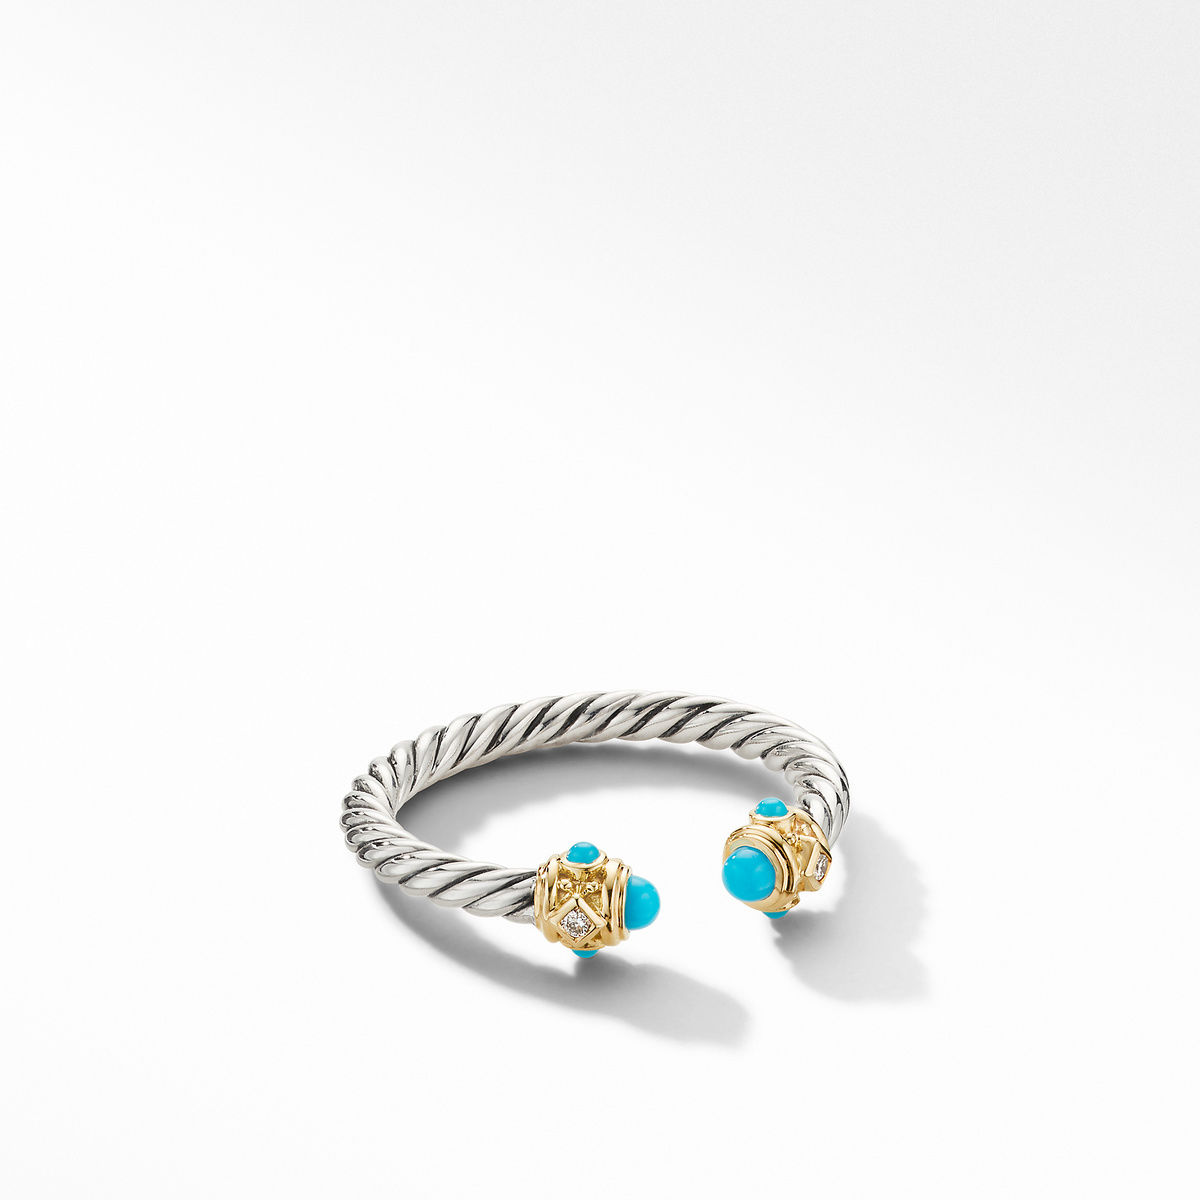 David Yurman Renaissance Ring in Sterling Silver with Turquoise, 14K Yellow Gold and Diamonds - Size 6